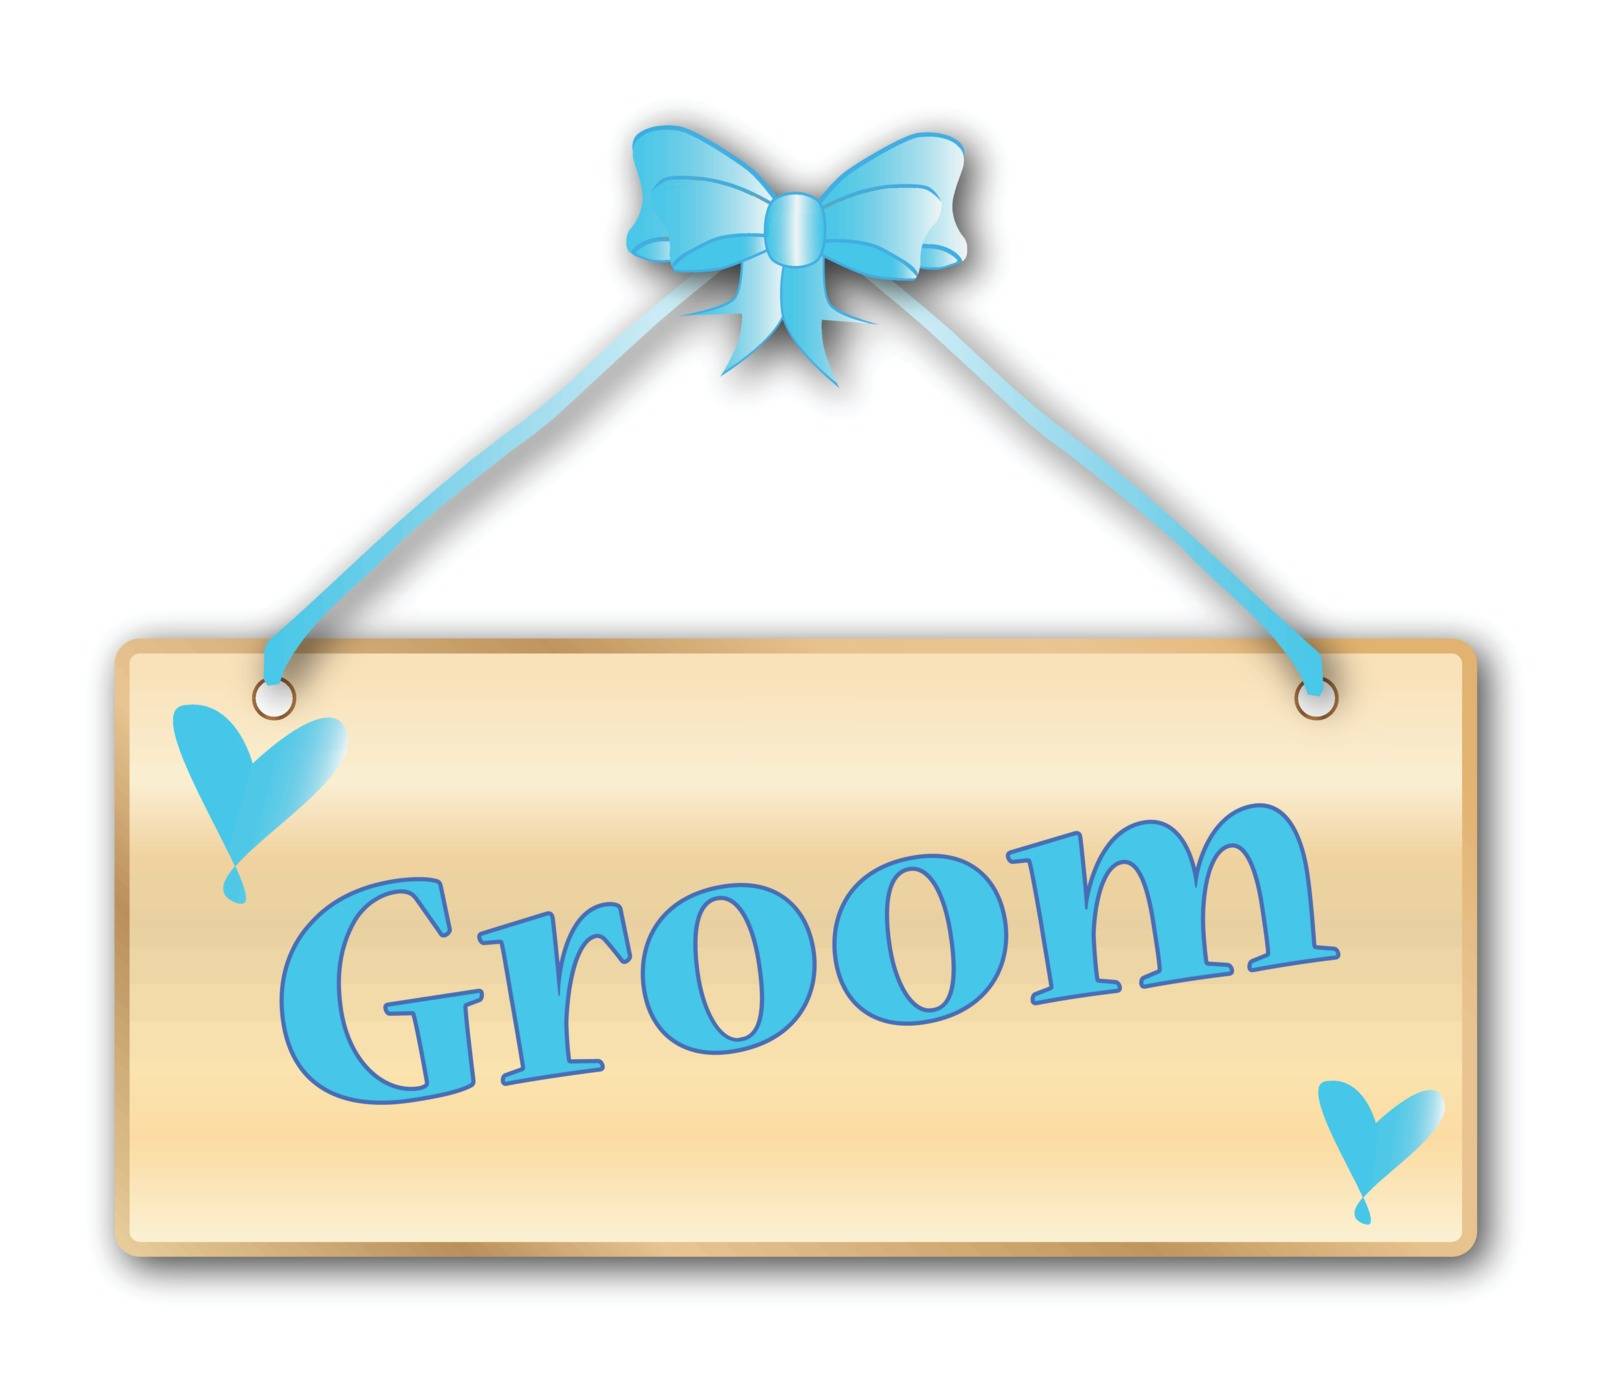 Groom plaque in woodgrain with blue ribbon and bow over a white background with love cartoon hearts